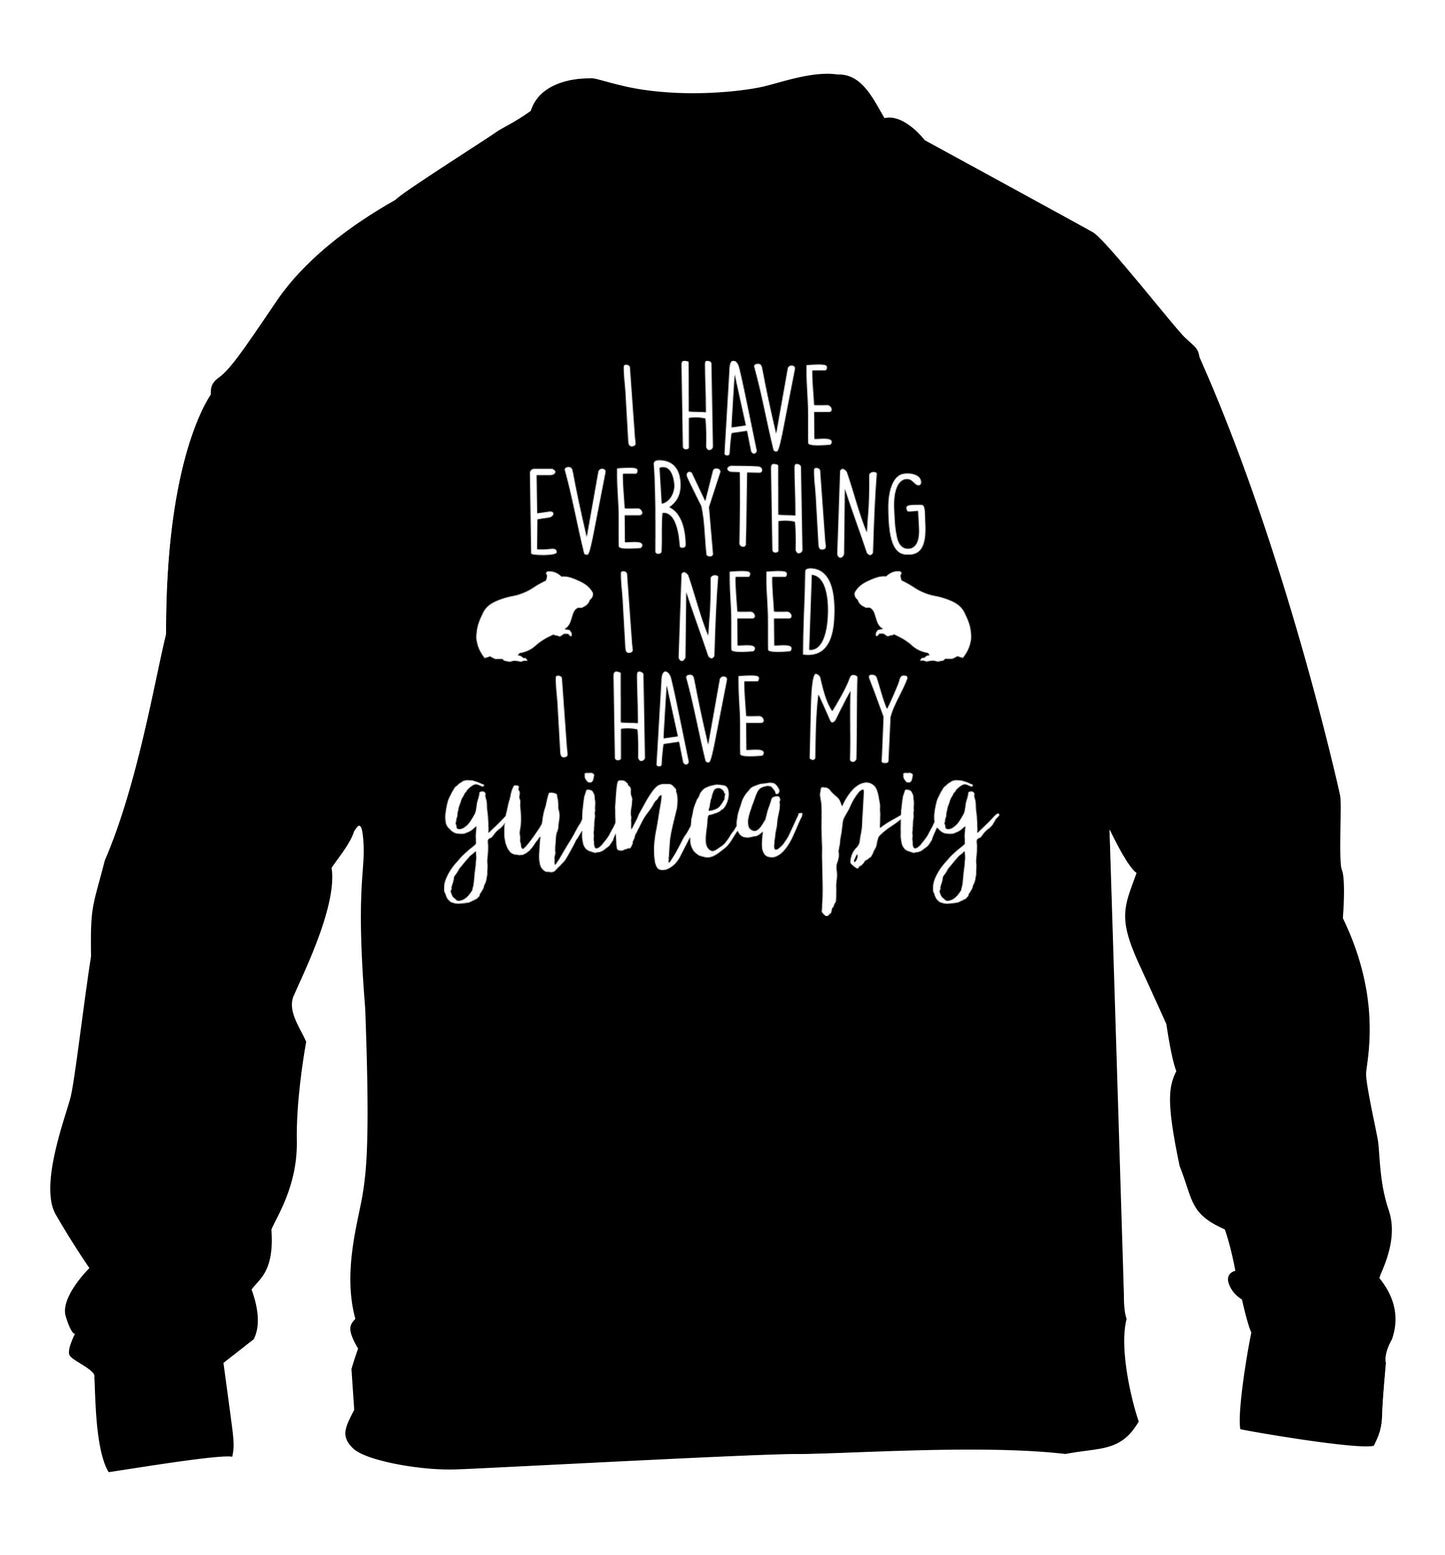 I have everything I need, I have my guinea pig children's black  sweater 12-14 Years